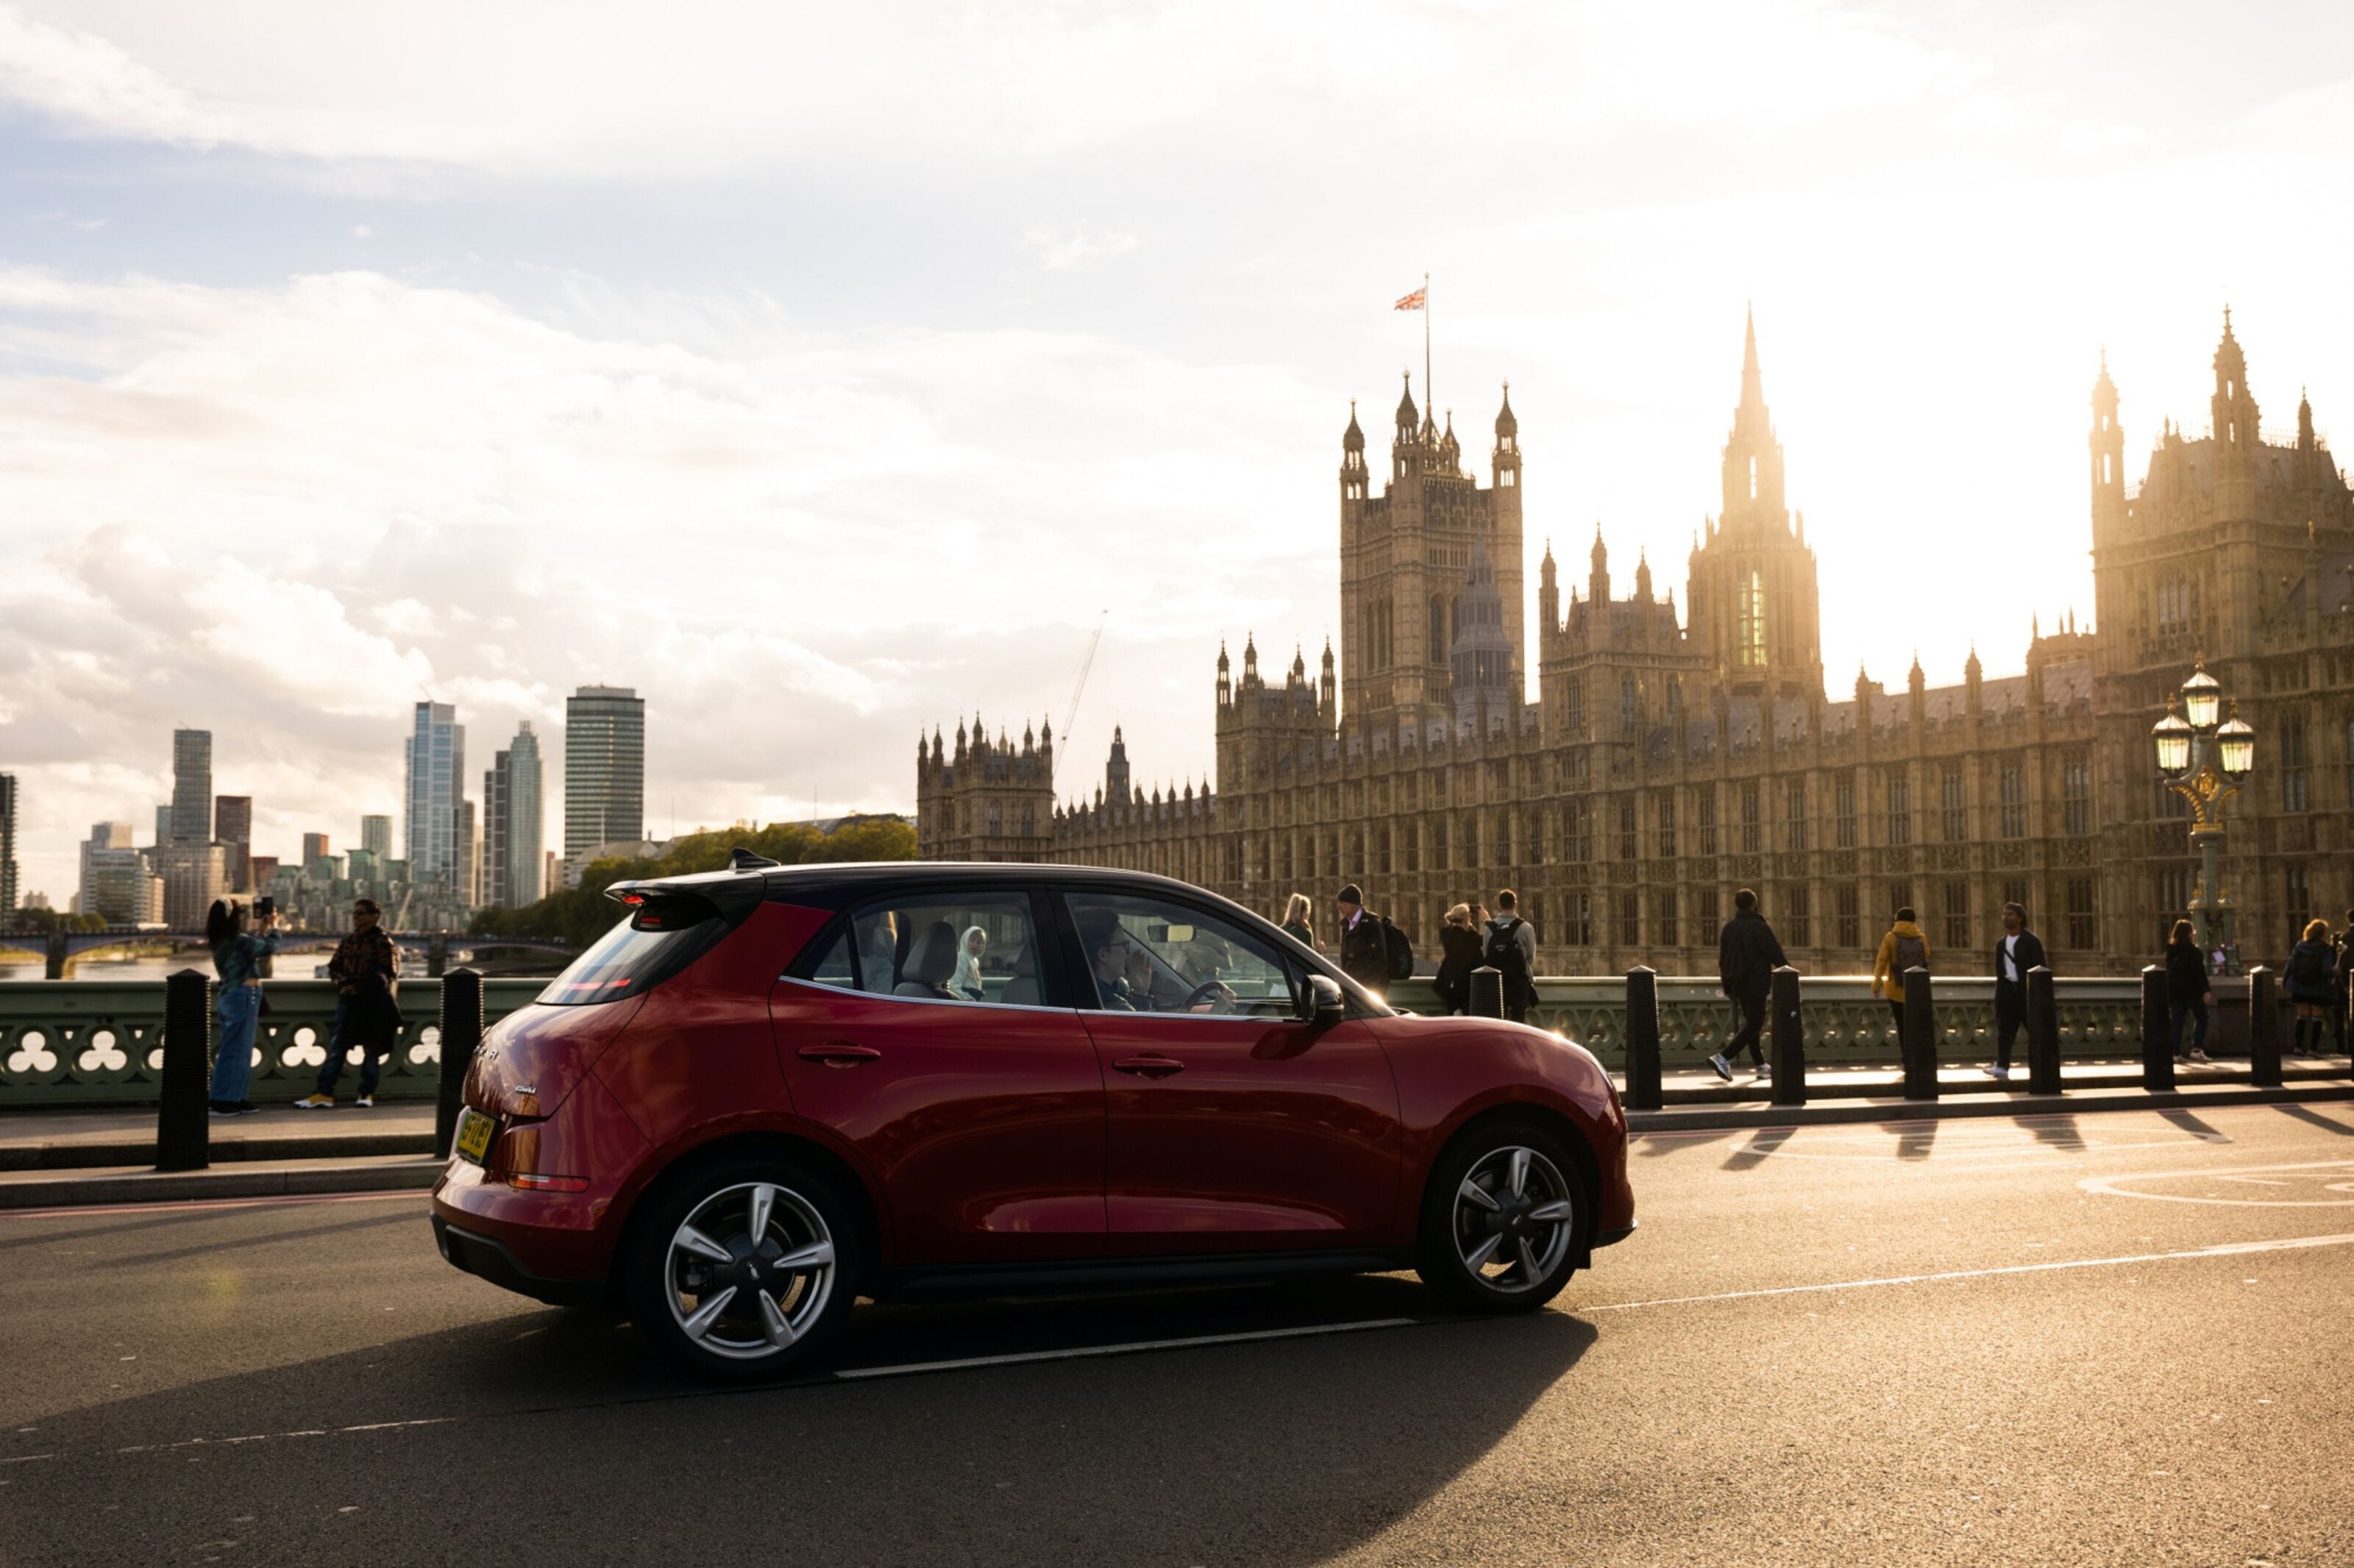 Test-driving the Ora Funky Cat EV in London on Oct. 24. MUST CREDIT: Bloomberg photo by Jose Sarmento Matos